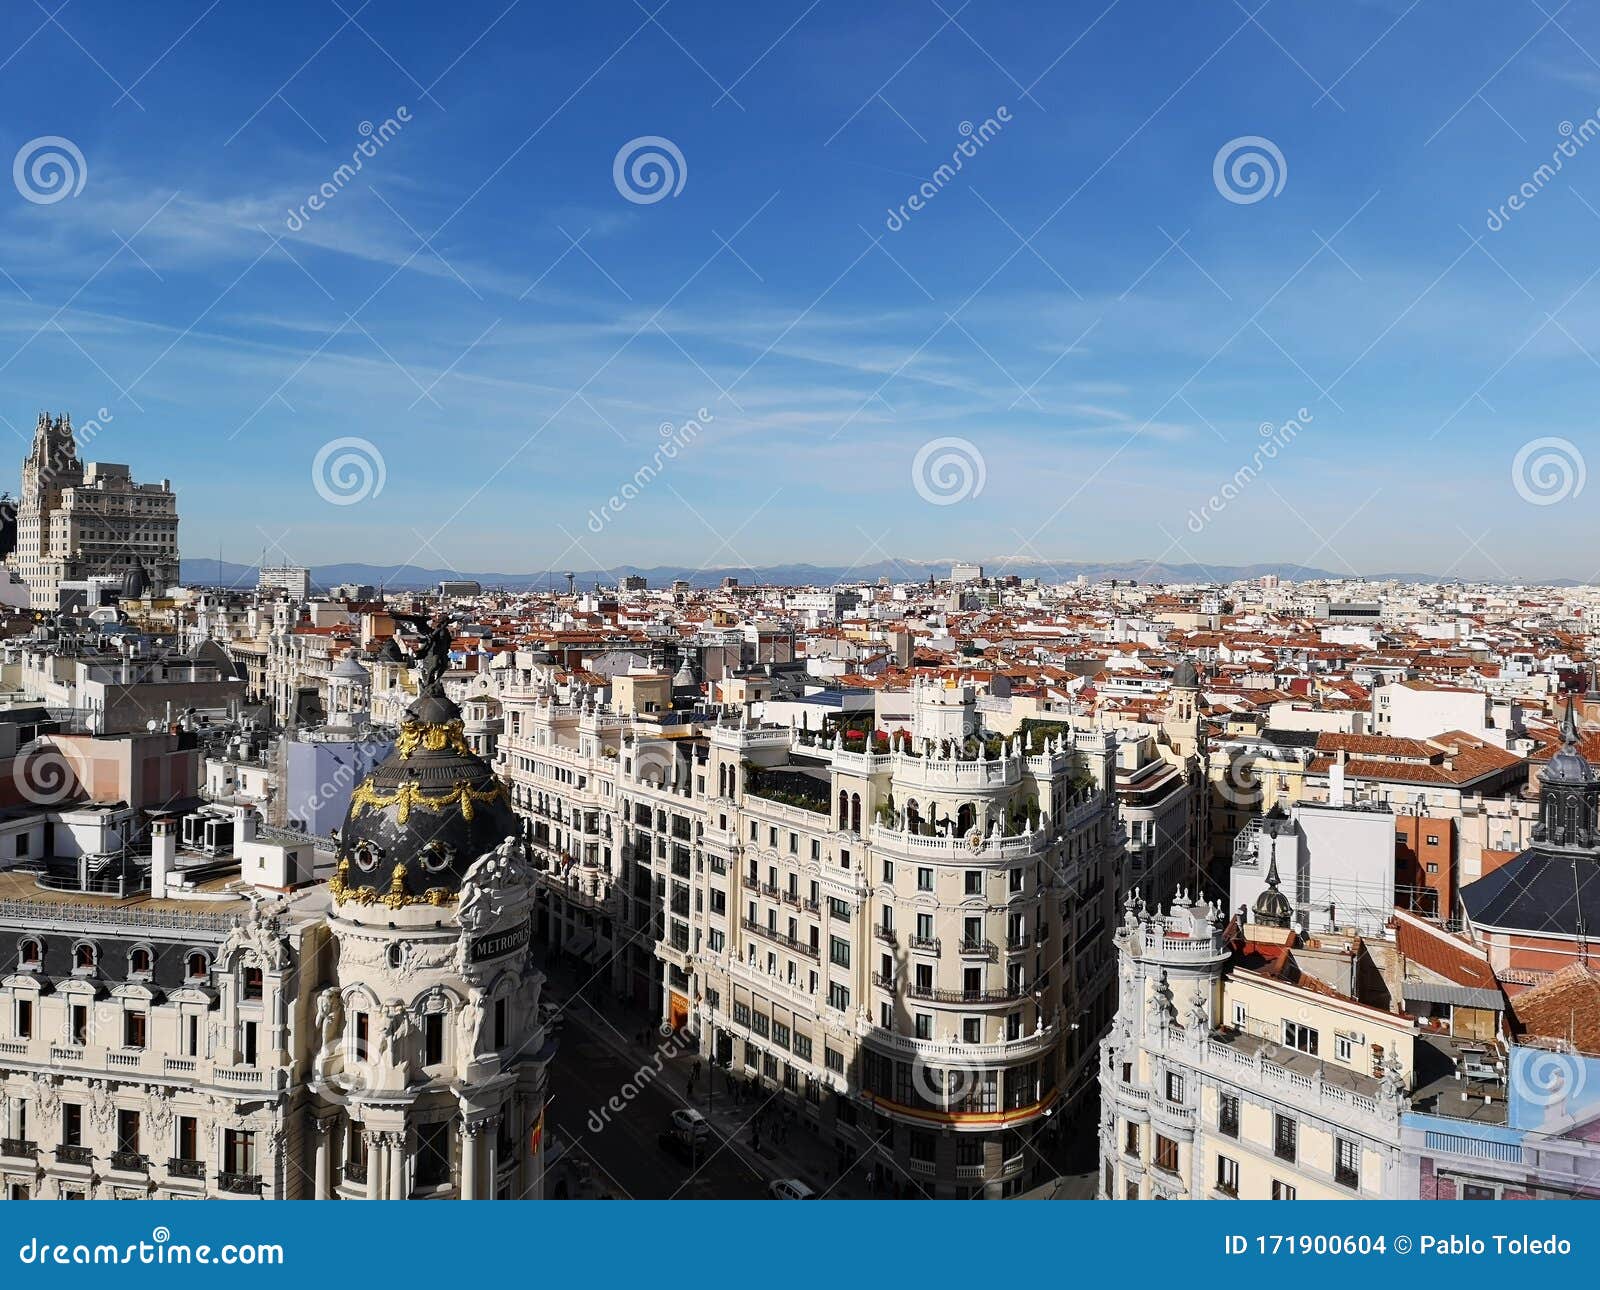 madrid skyline with mountains